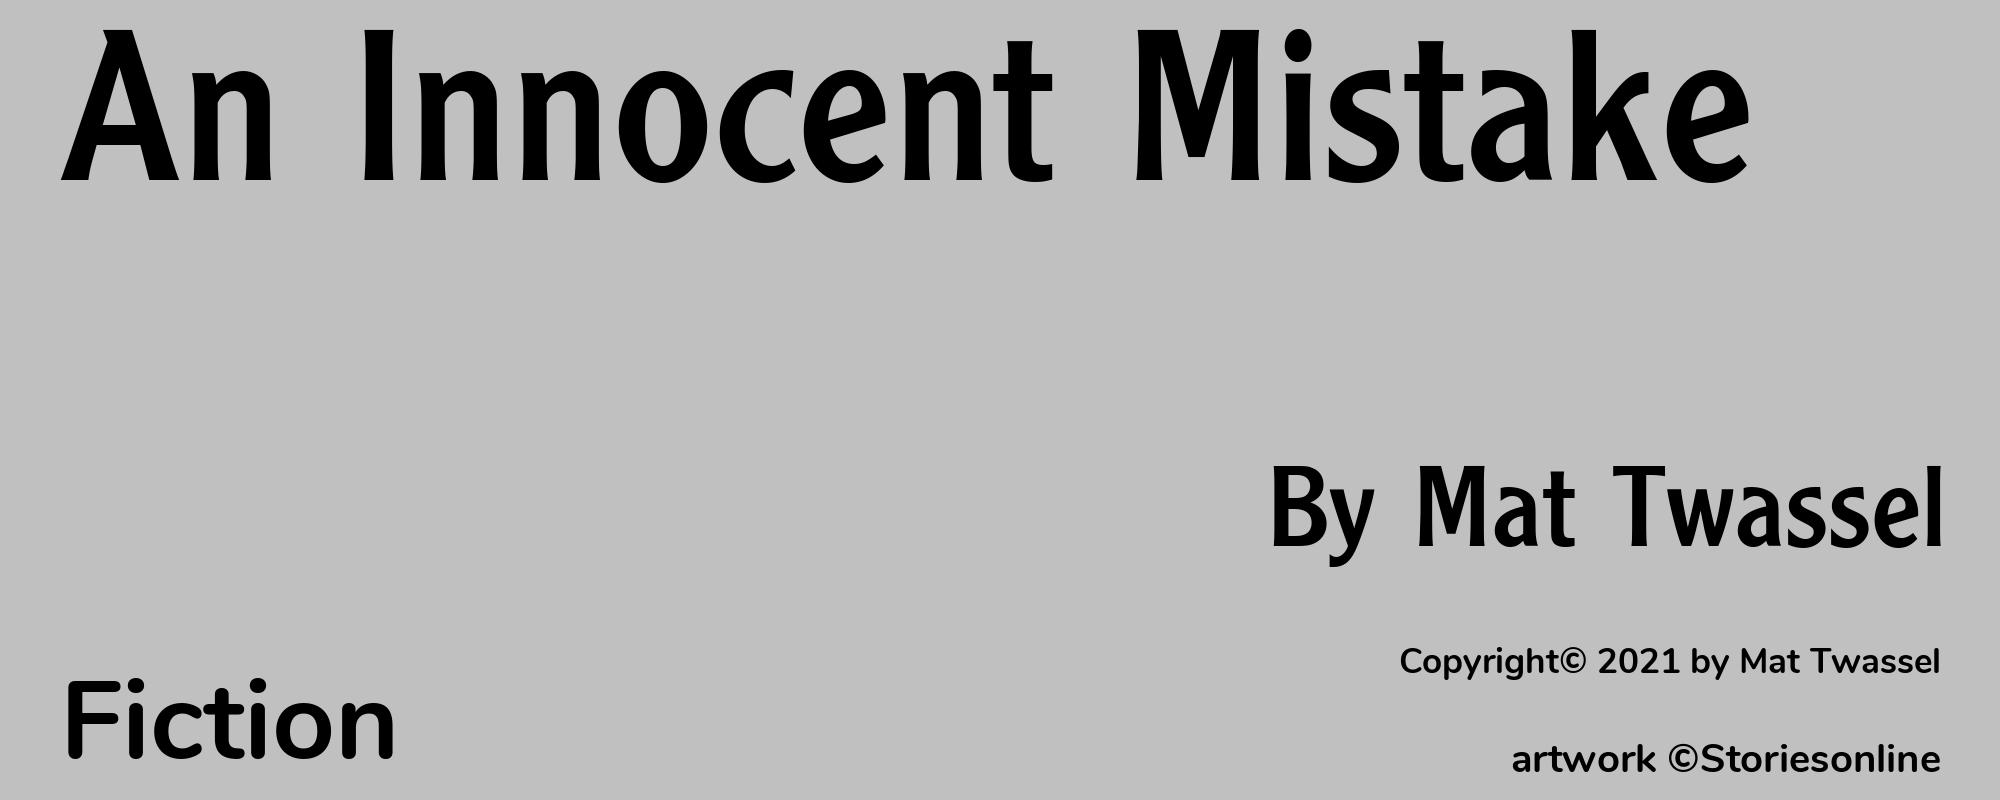 An Innocent Mistake - Cover